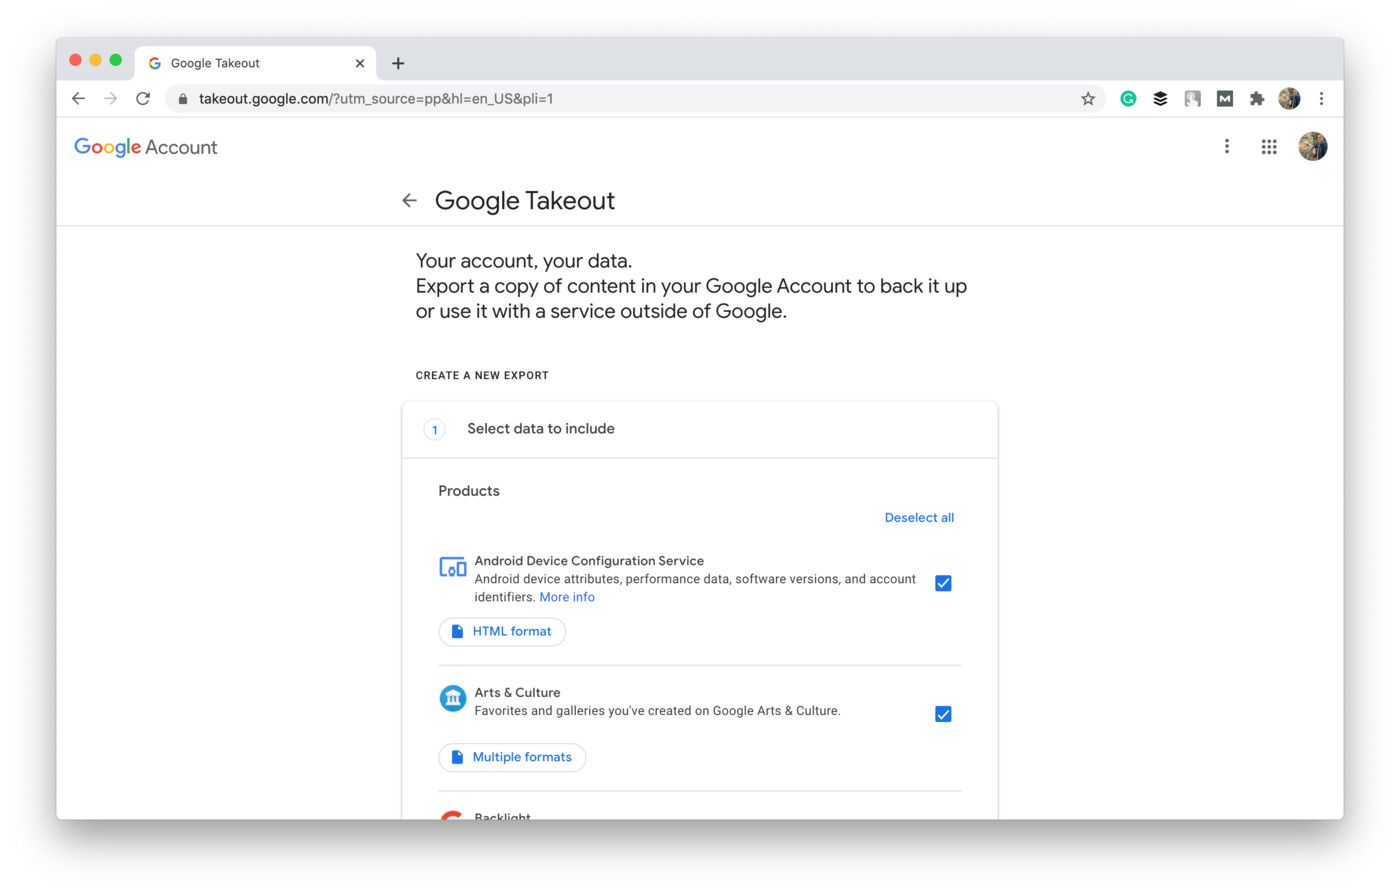 Shot from the Google Takeout website